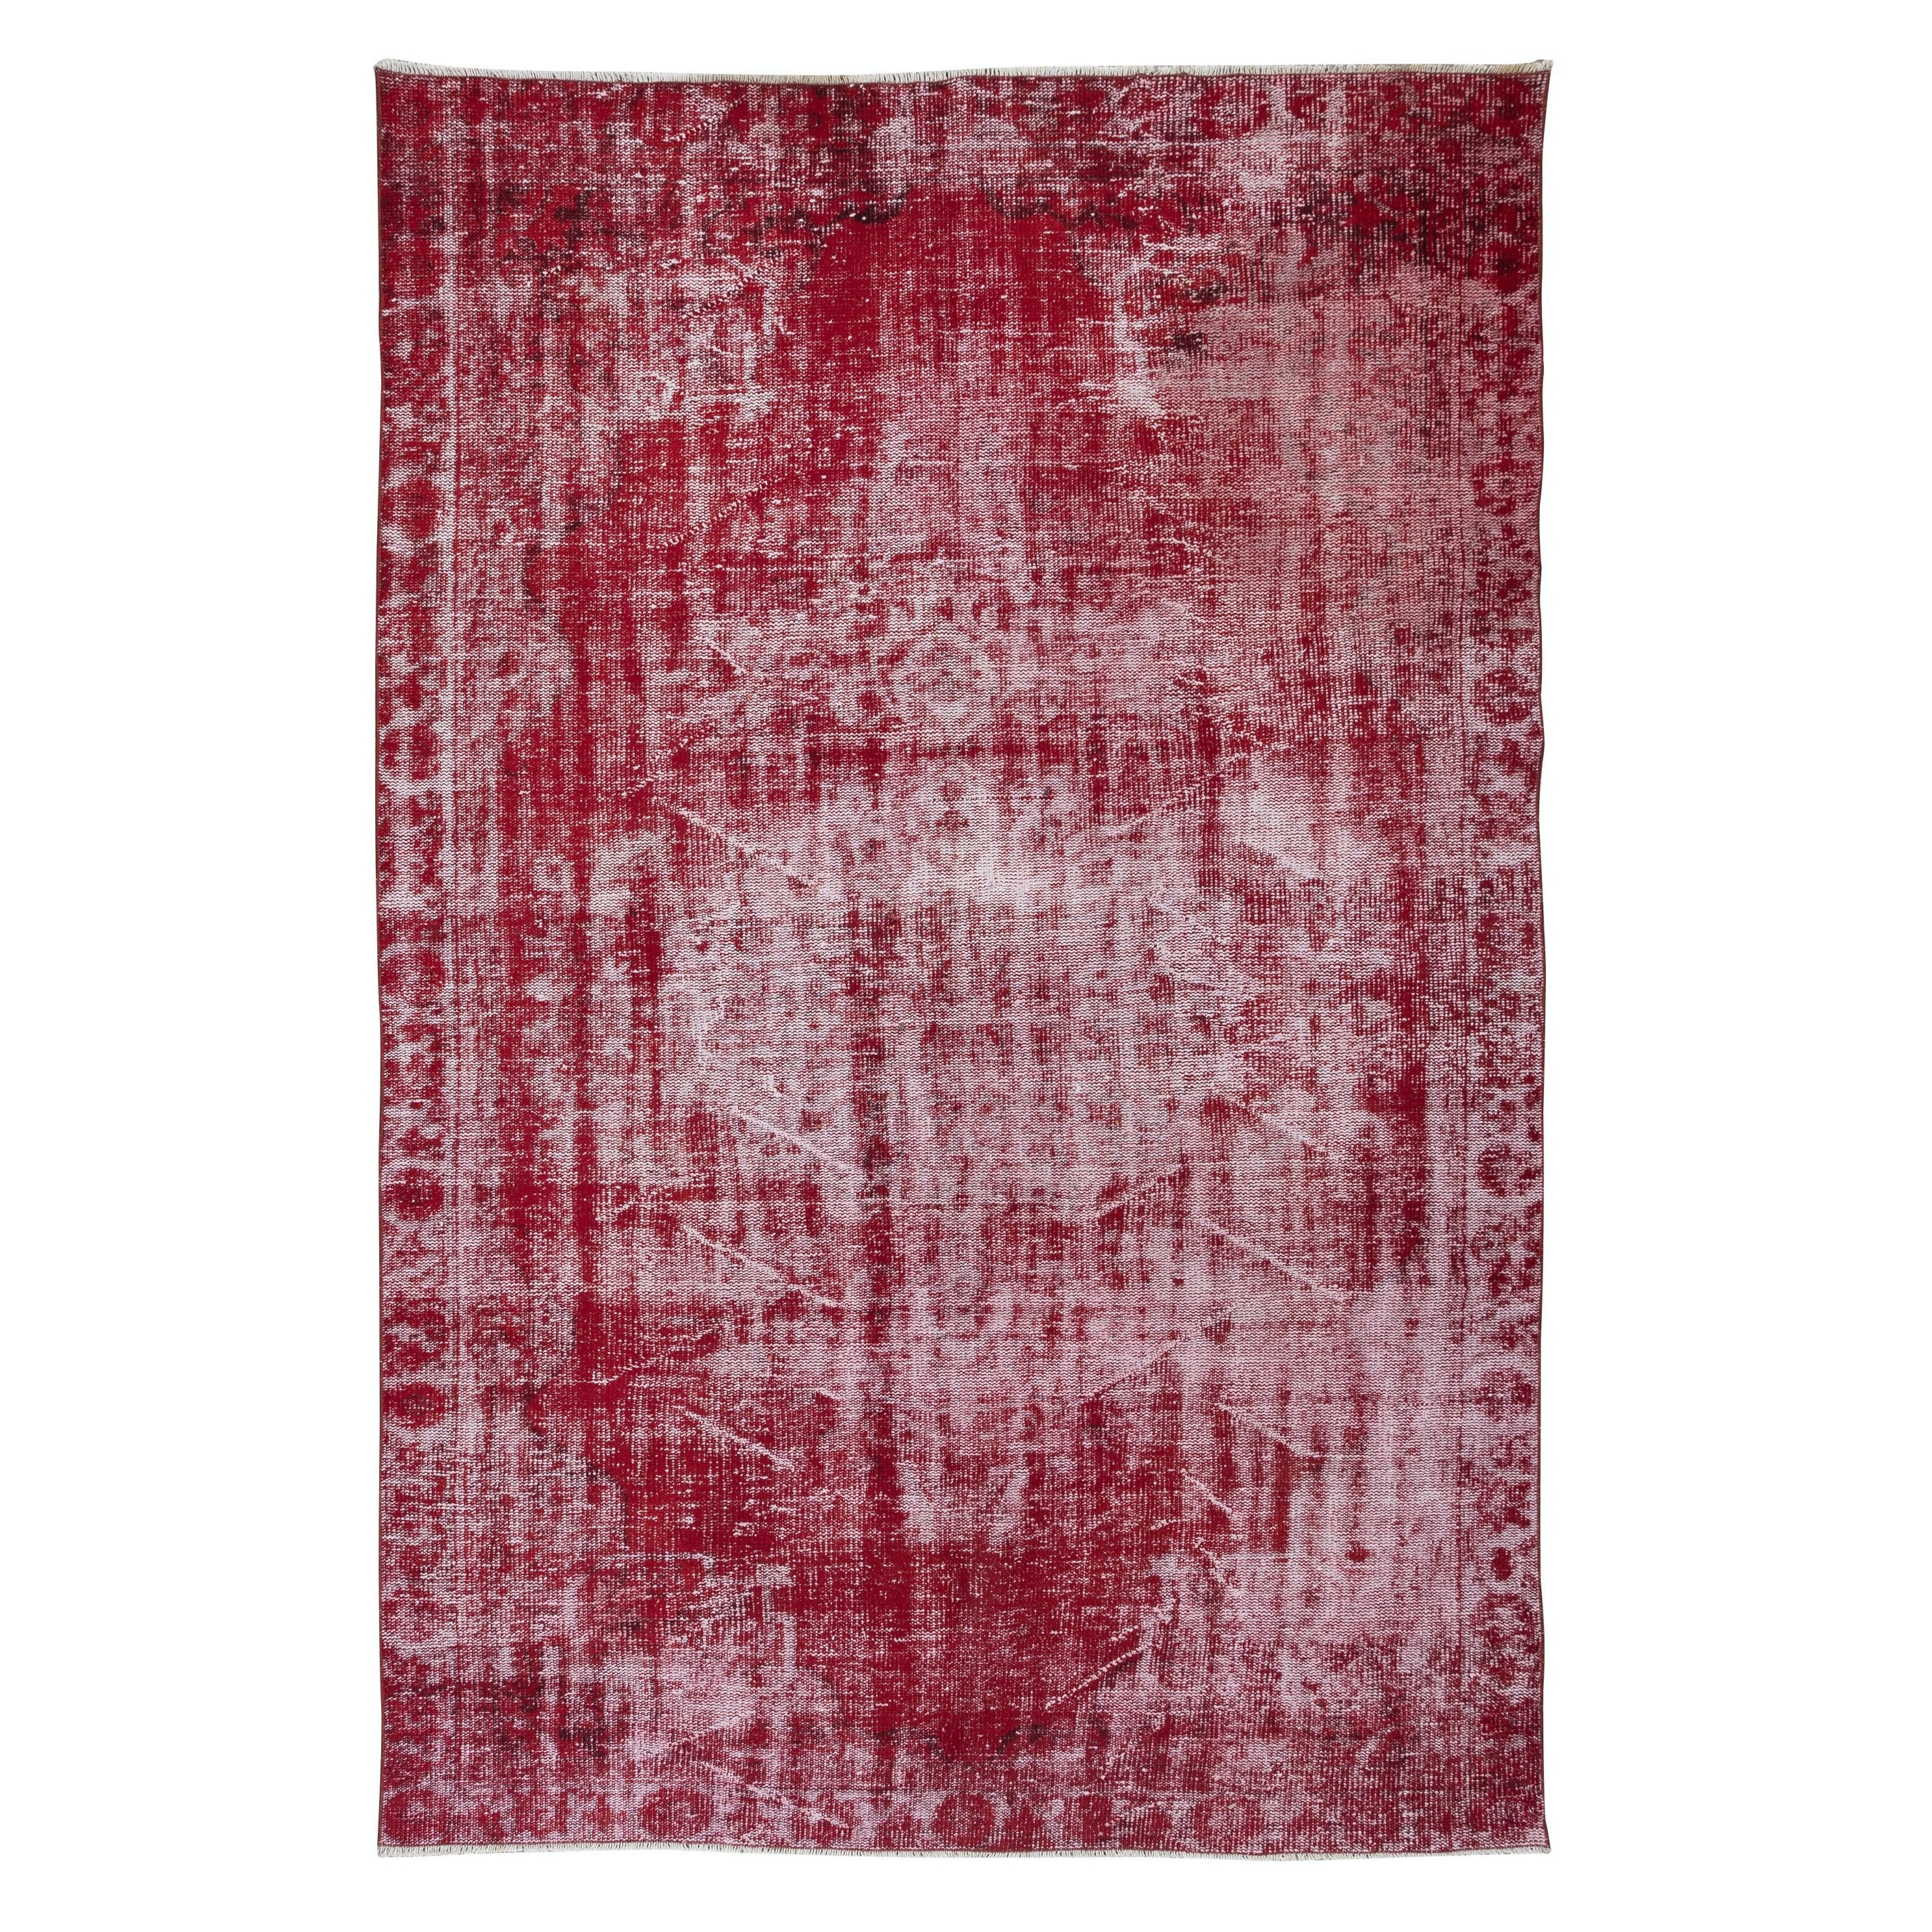 6x9 Ft Distressed Vintage Handmade Rug, Modern Red Turkish Shabby Chic Carpet For Sale